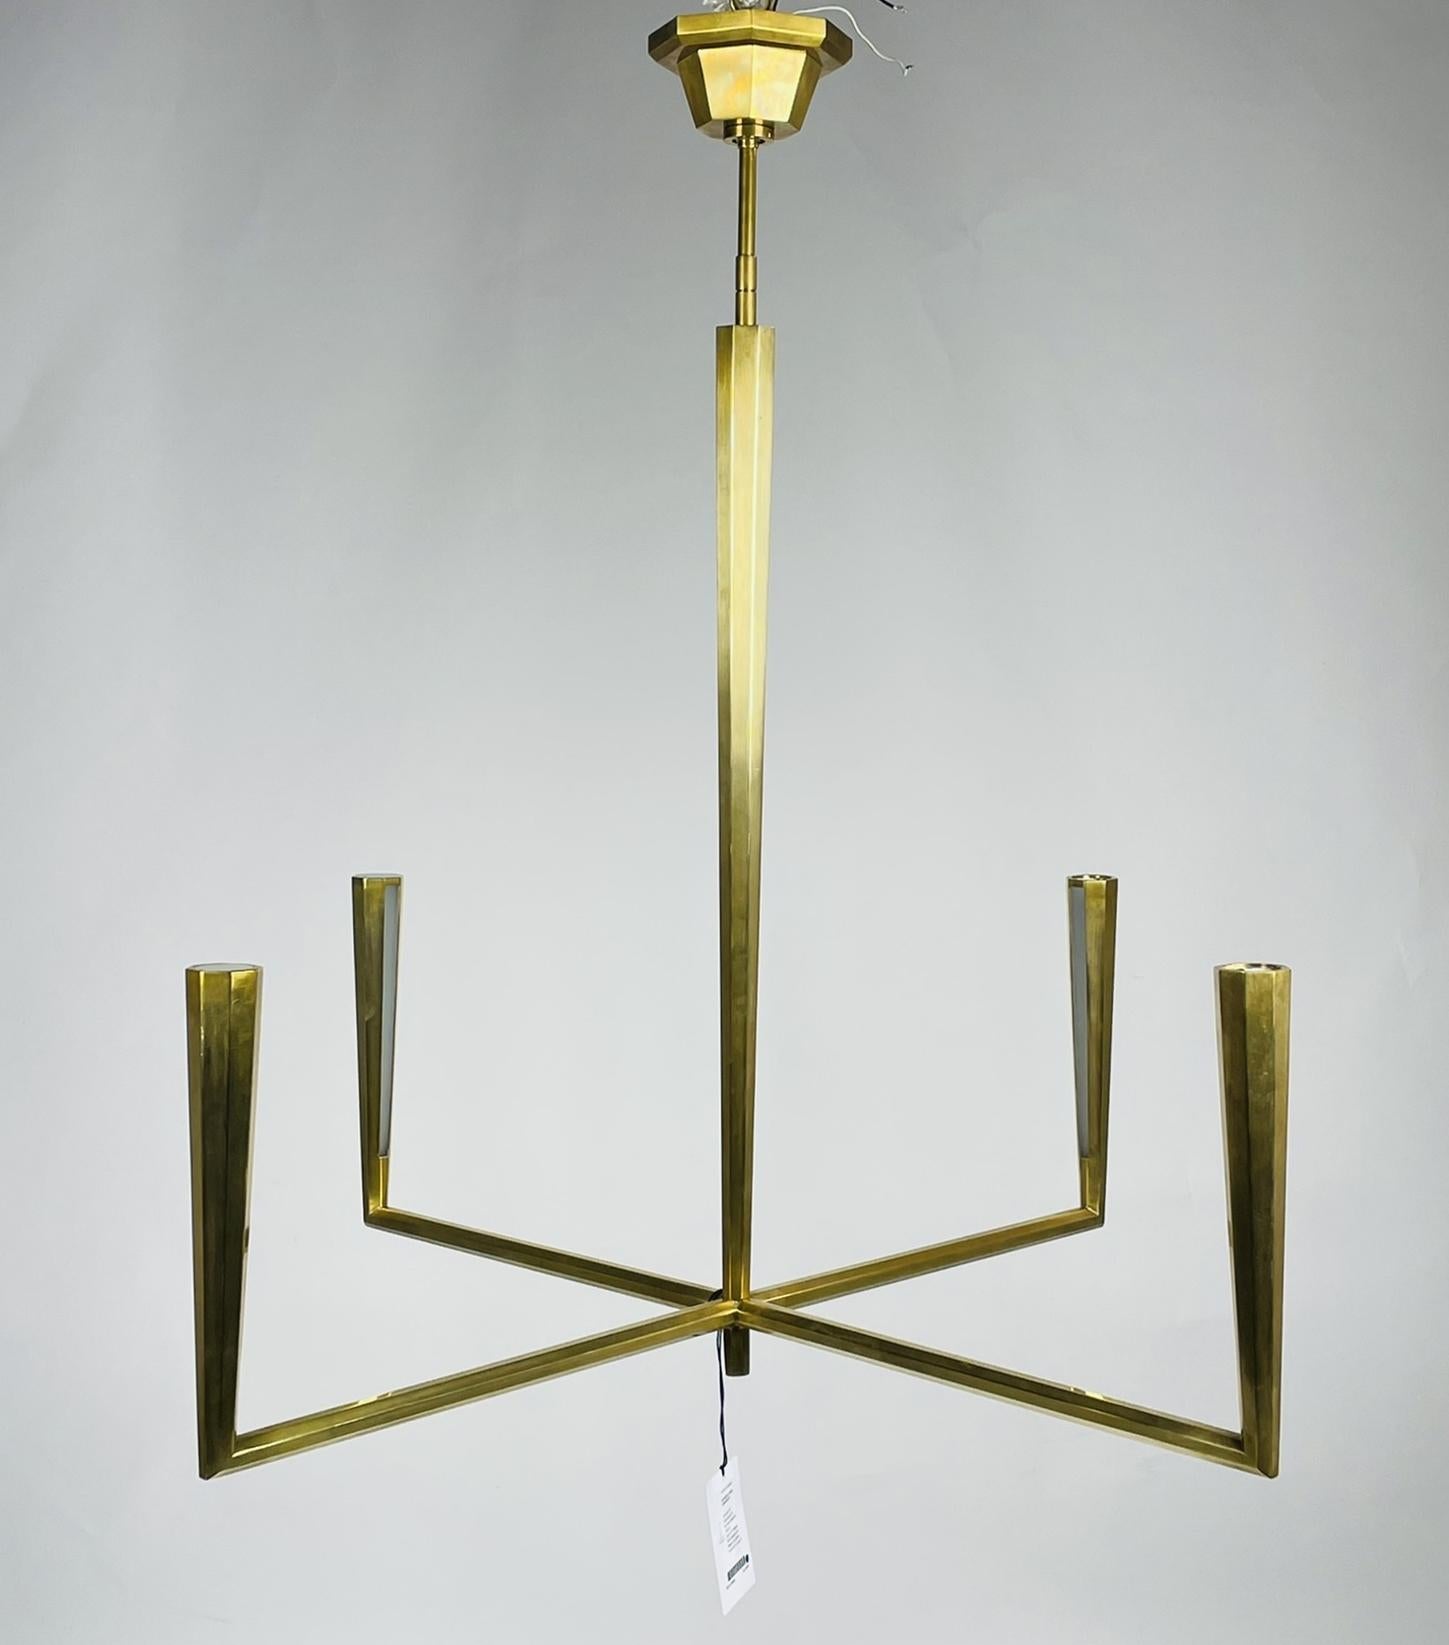 Eye-catching sleek metal lines define the Galahad by Thomas O'Brien. The minimalist aesthetic is at once modern and timeless.
Crafted from solid sculpted and welded brass, the refined fixture will add a soft glow to any